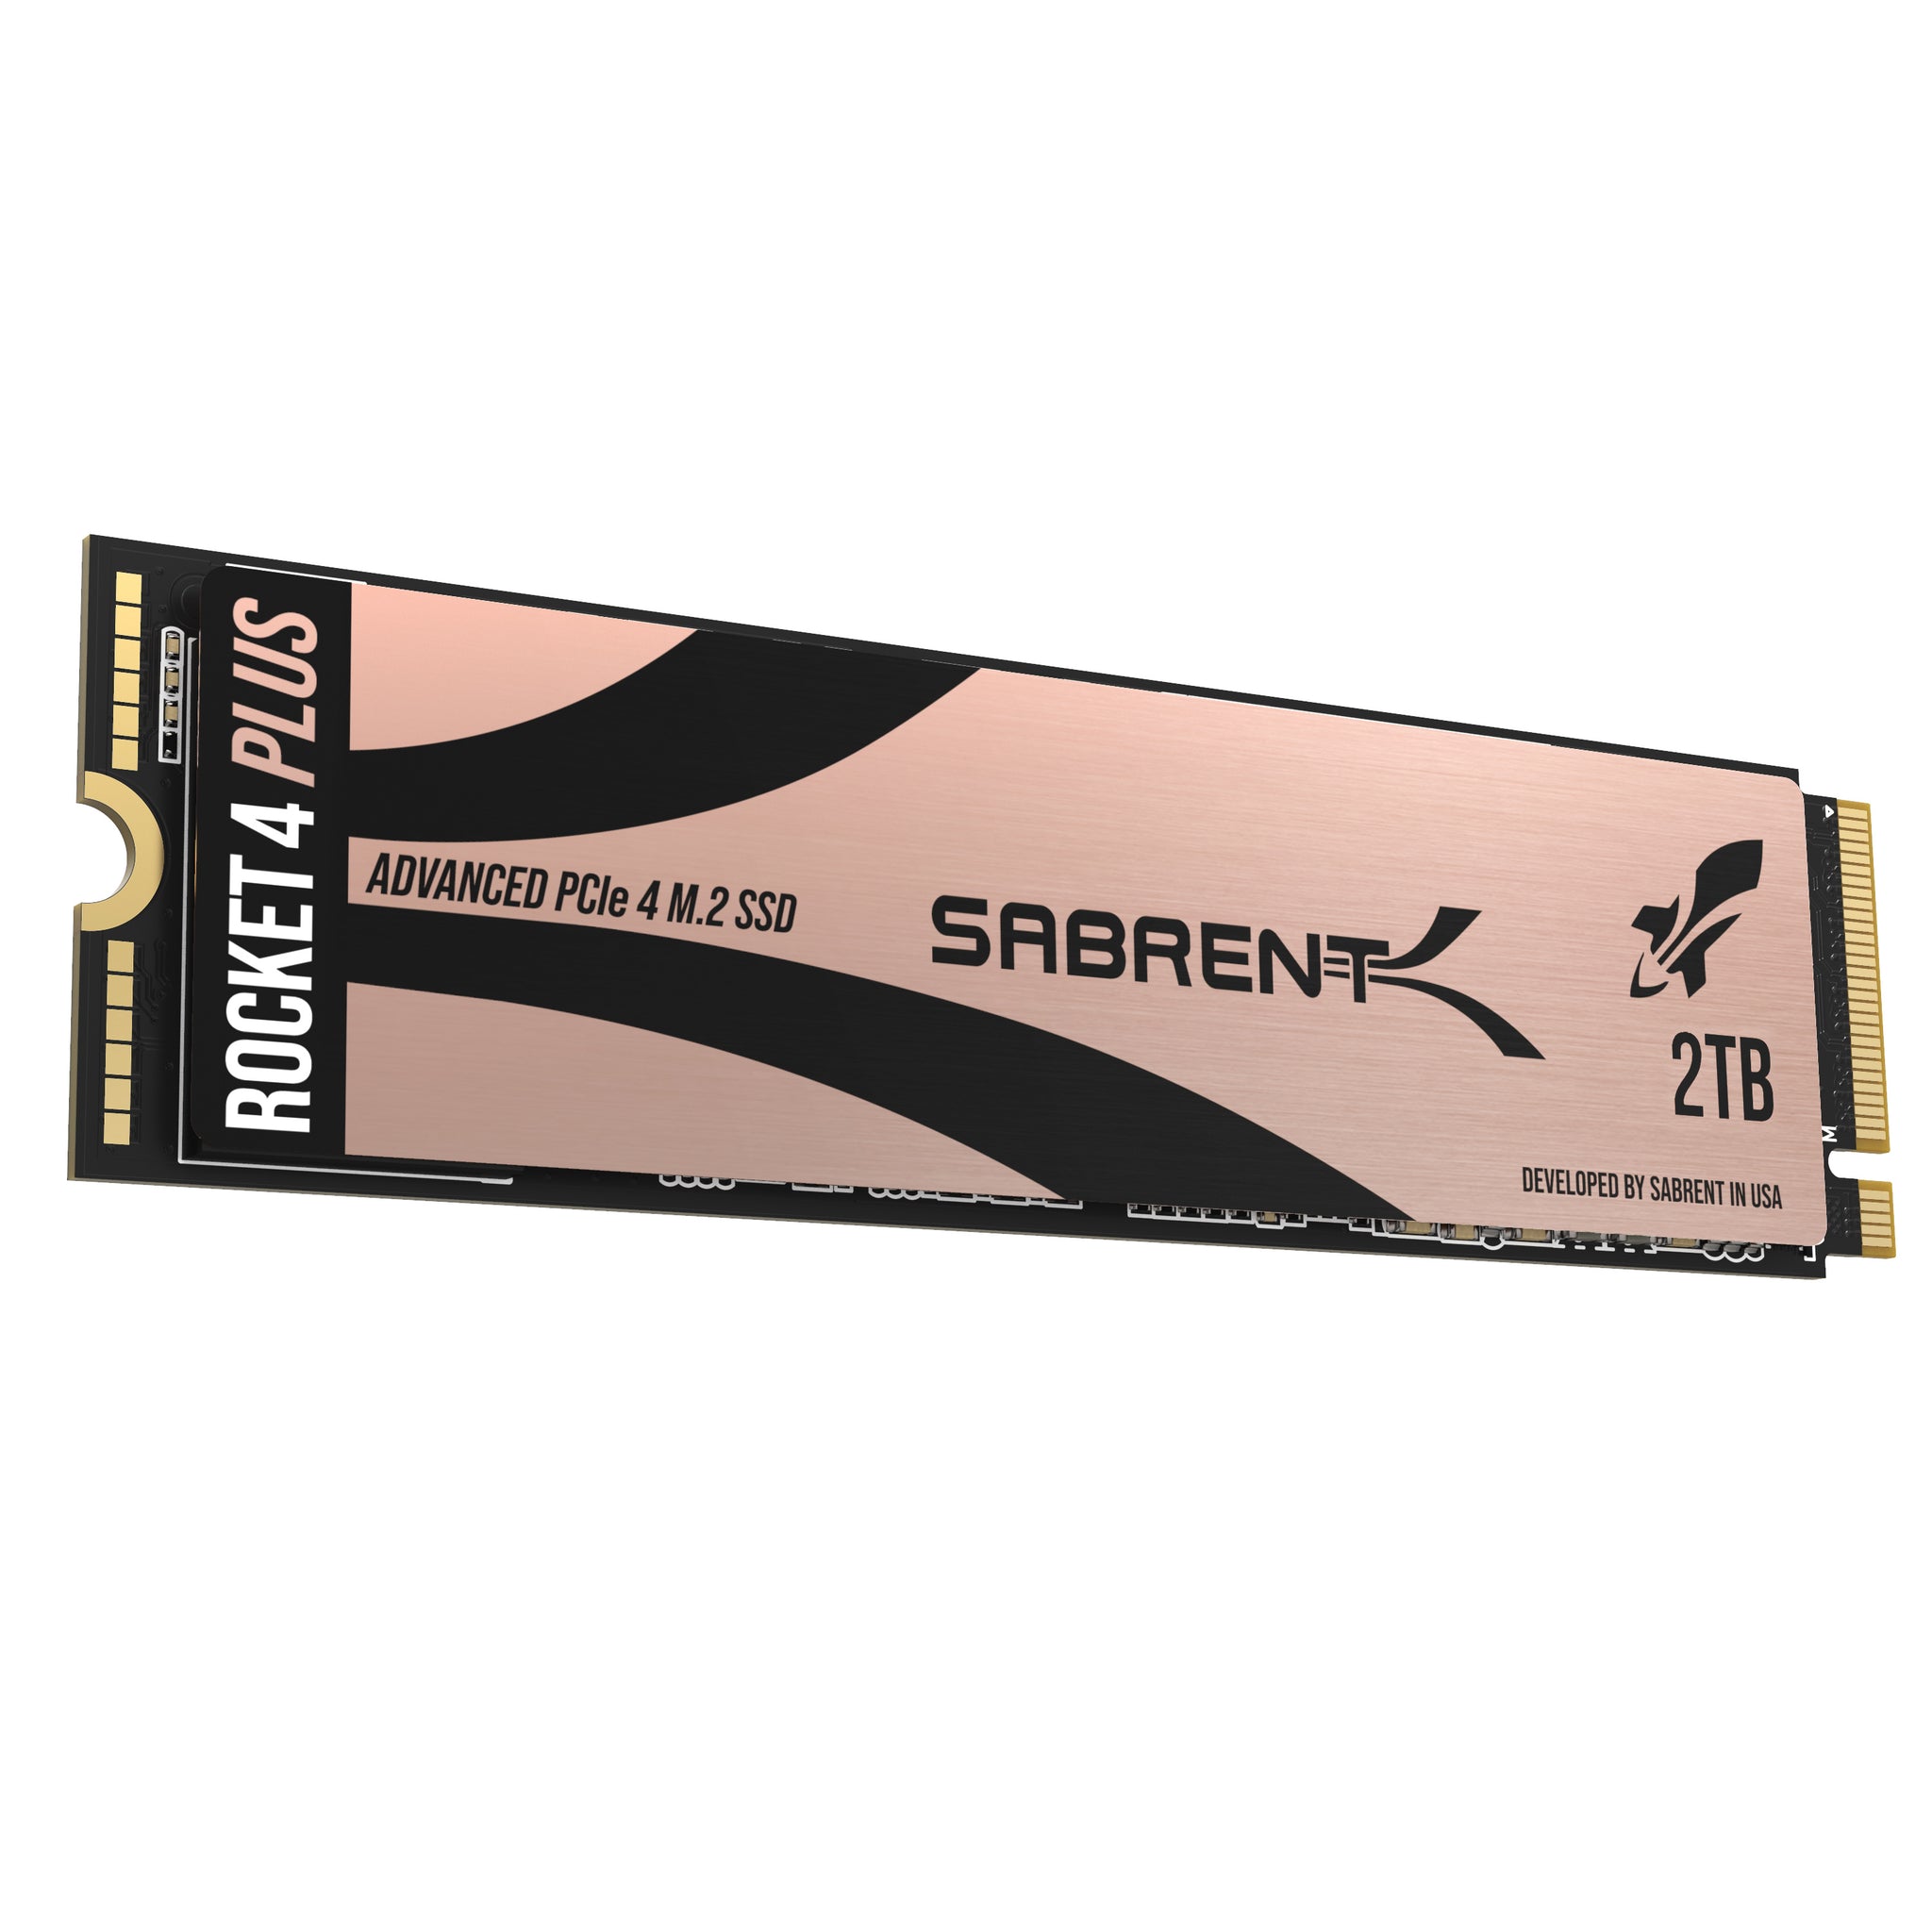 Sabrent Rocket 4 Plus 2TB SSD Review – BabelTechReviews